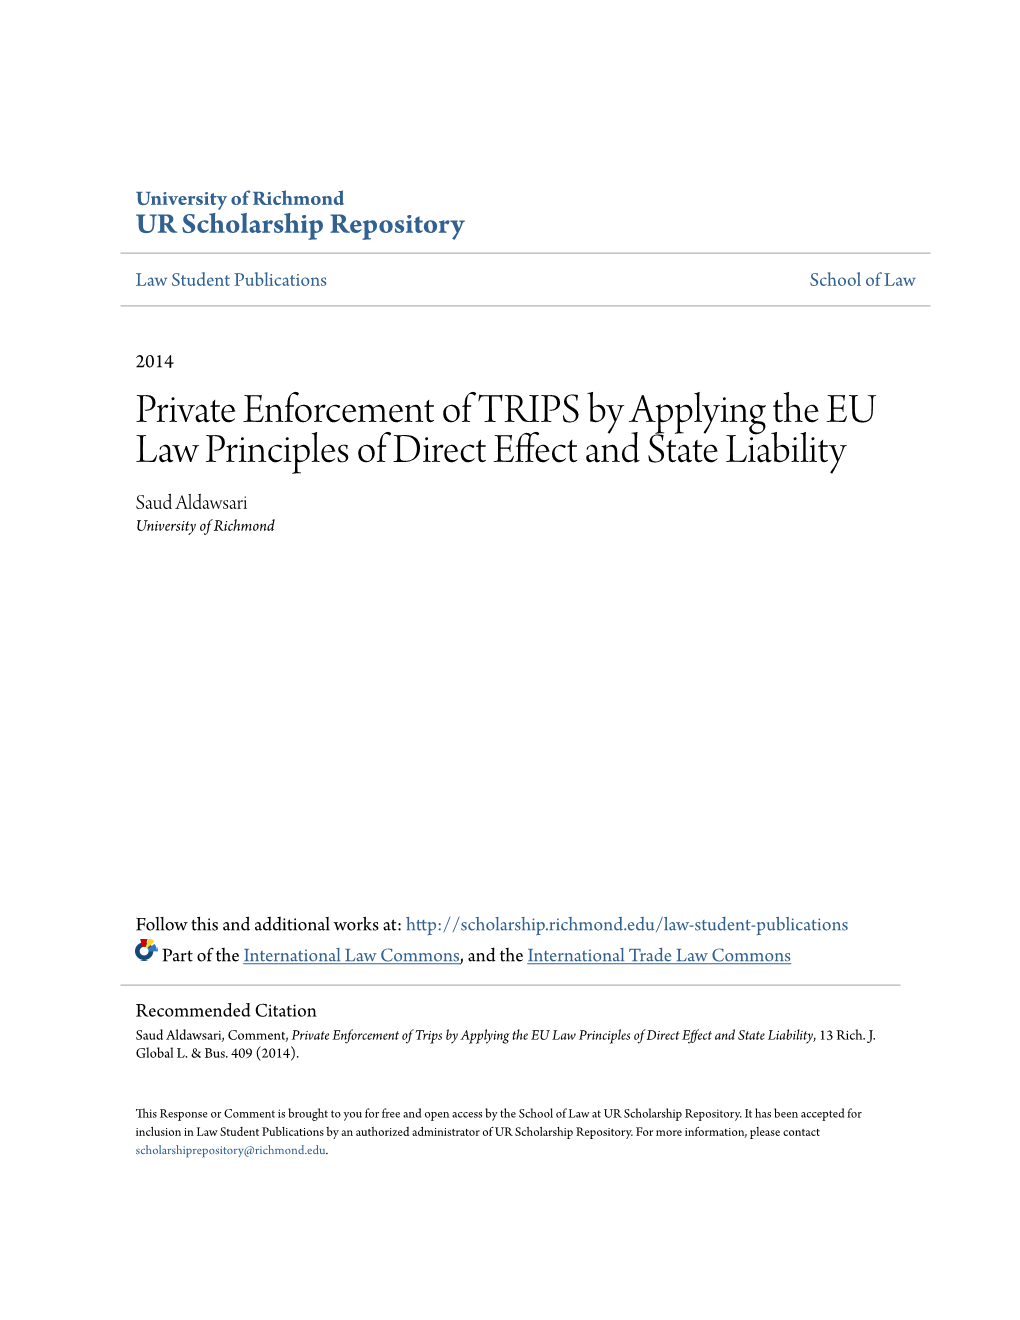 Private Enforcement of TRIPS by Applying the EU Law Principles of Direct Effect and State Liability Saud Aldawsari University of Richmond